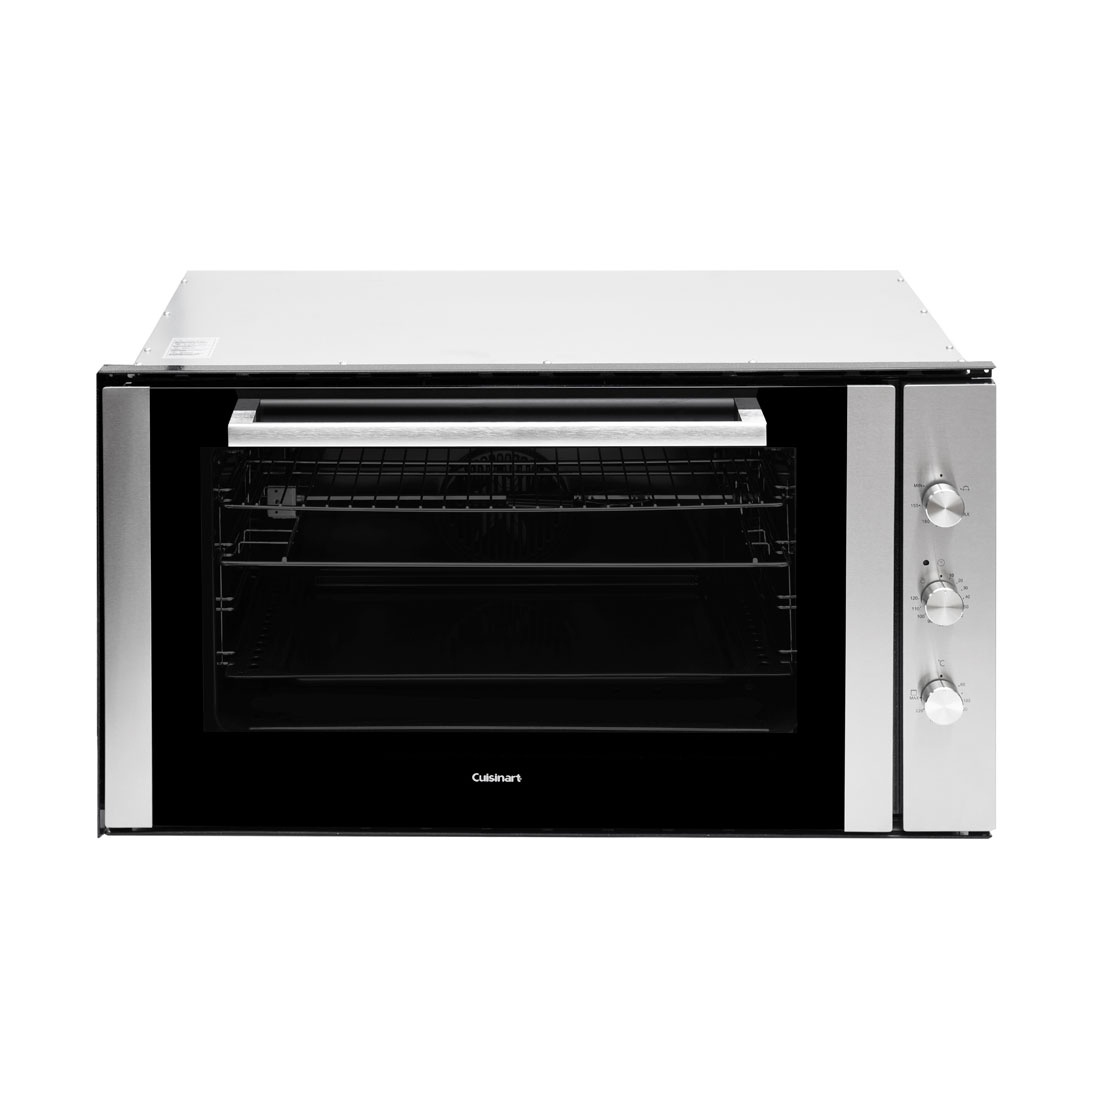 Forno Gás Cuisinart Prime Cooking Grill Elétrico Cuisinart